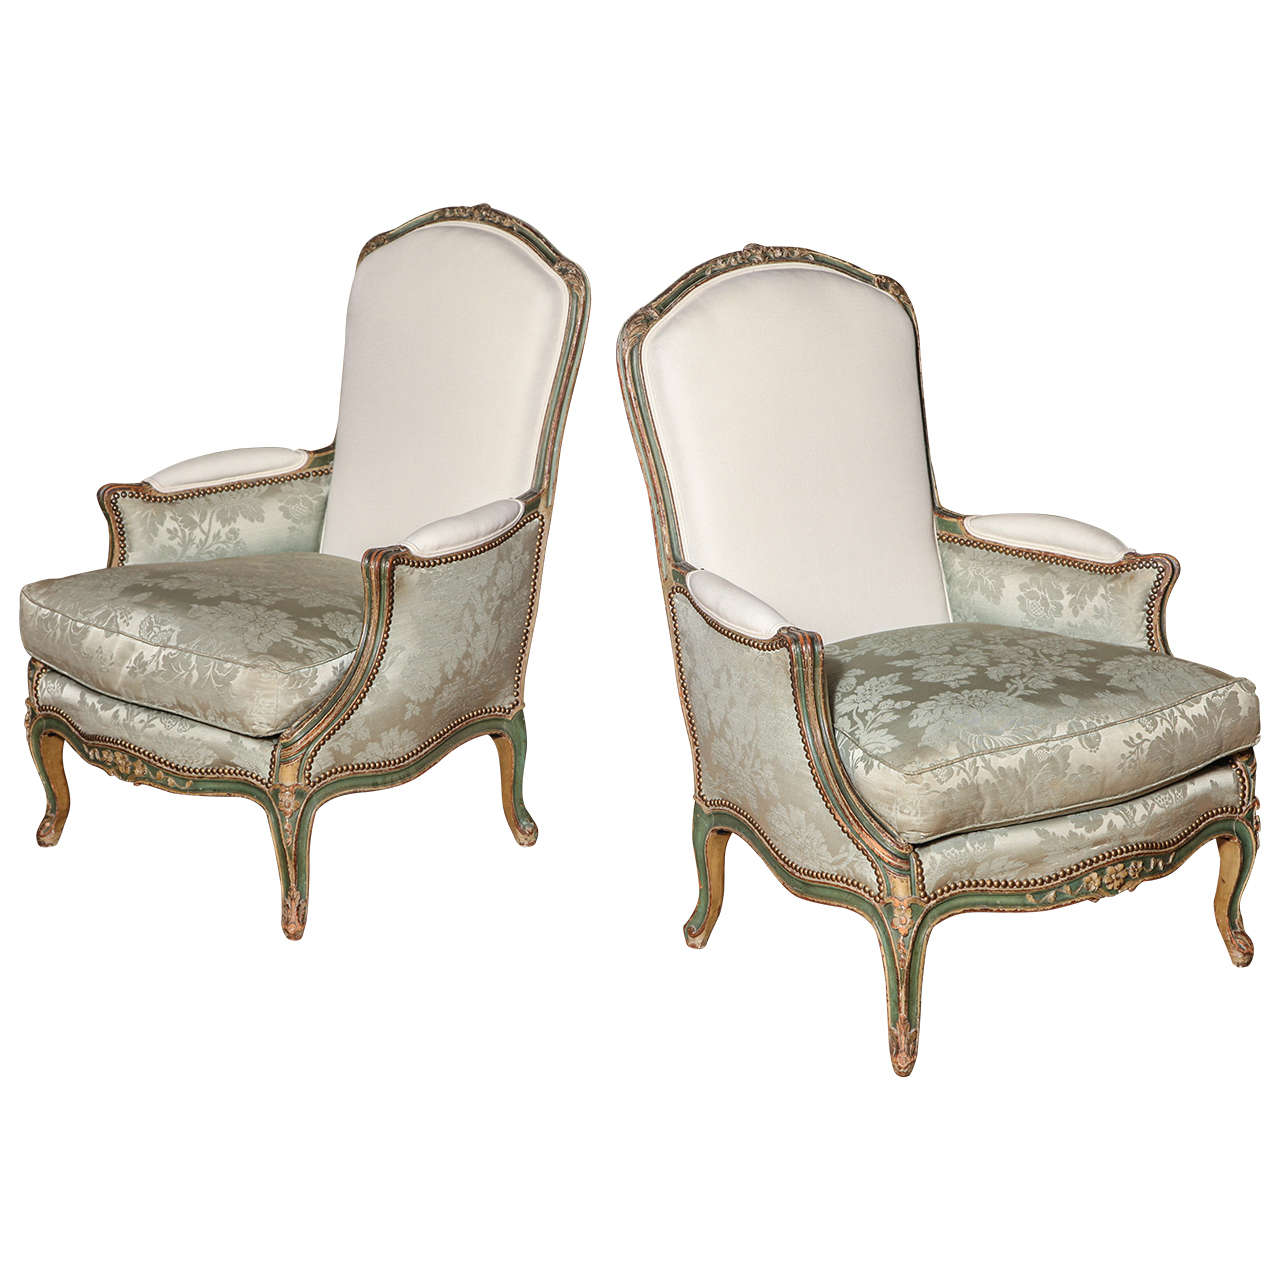 A Pair of Louis XV Style Carved and Painted Bergeres, France Late 19th Century